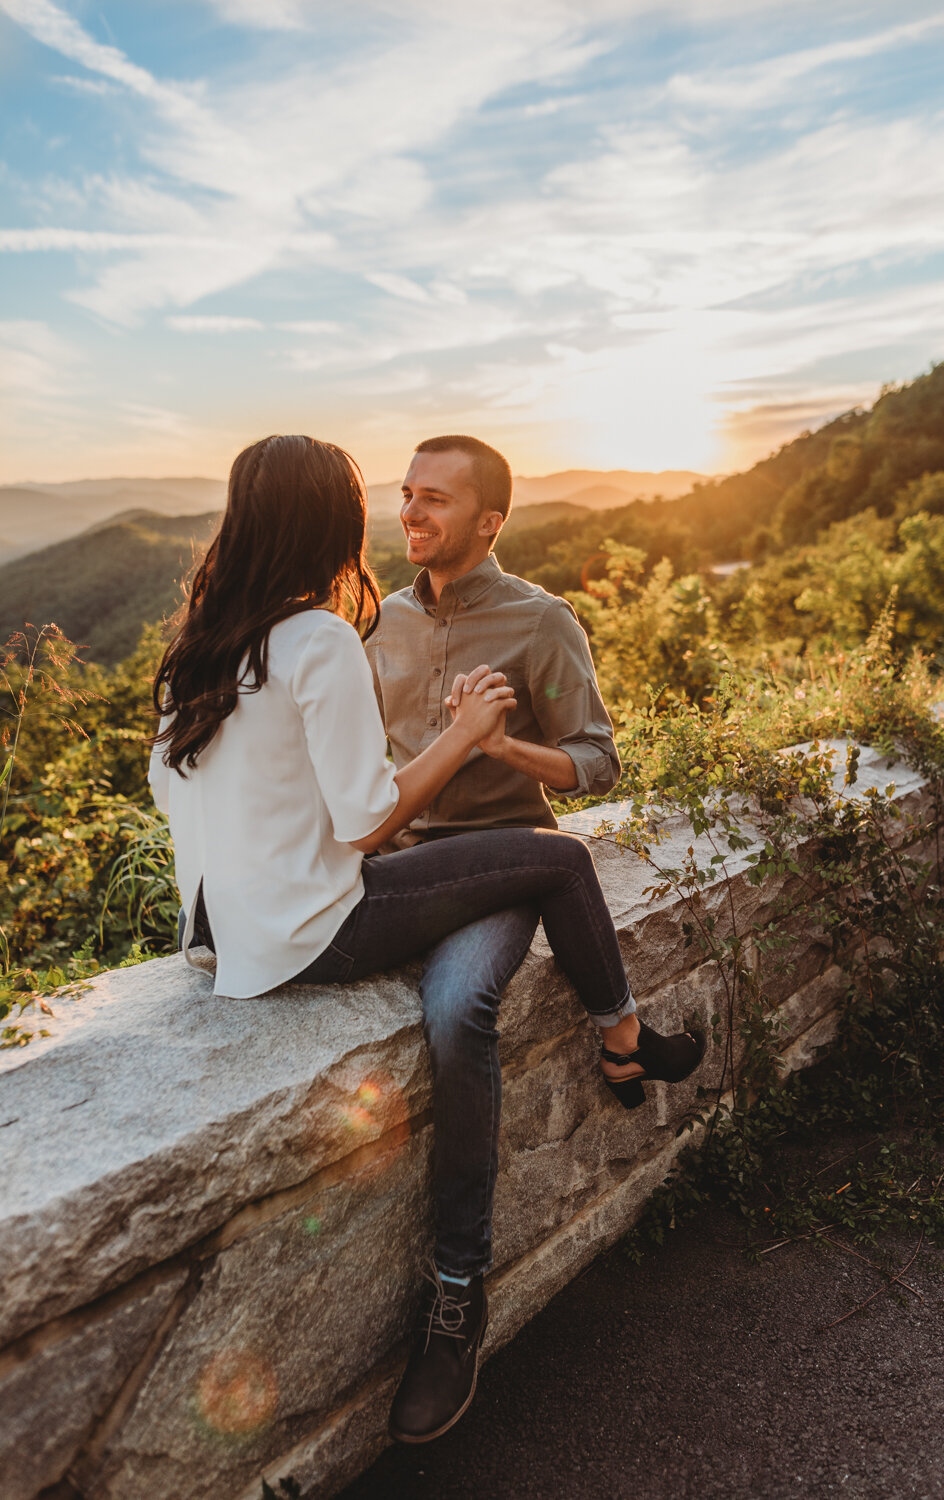 Love in the Great Smoky Mountains: A National Park Romance